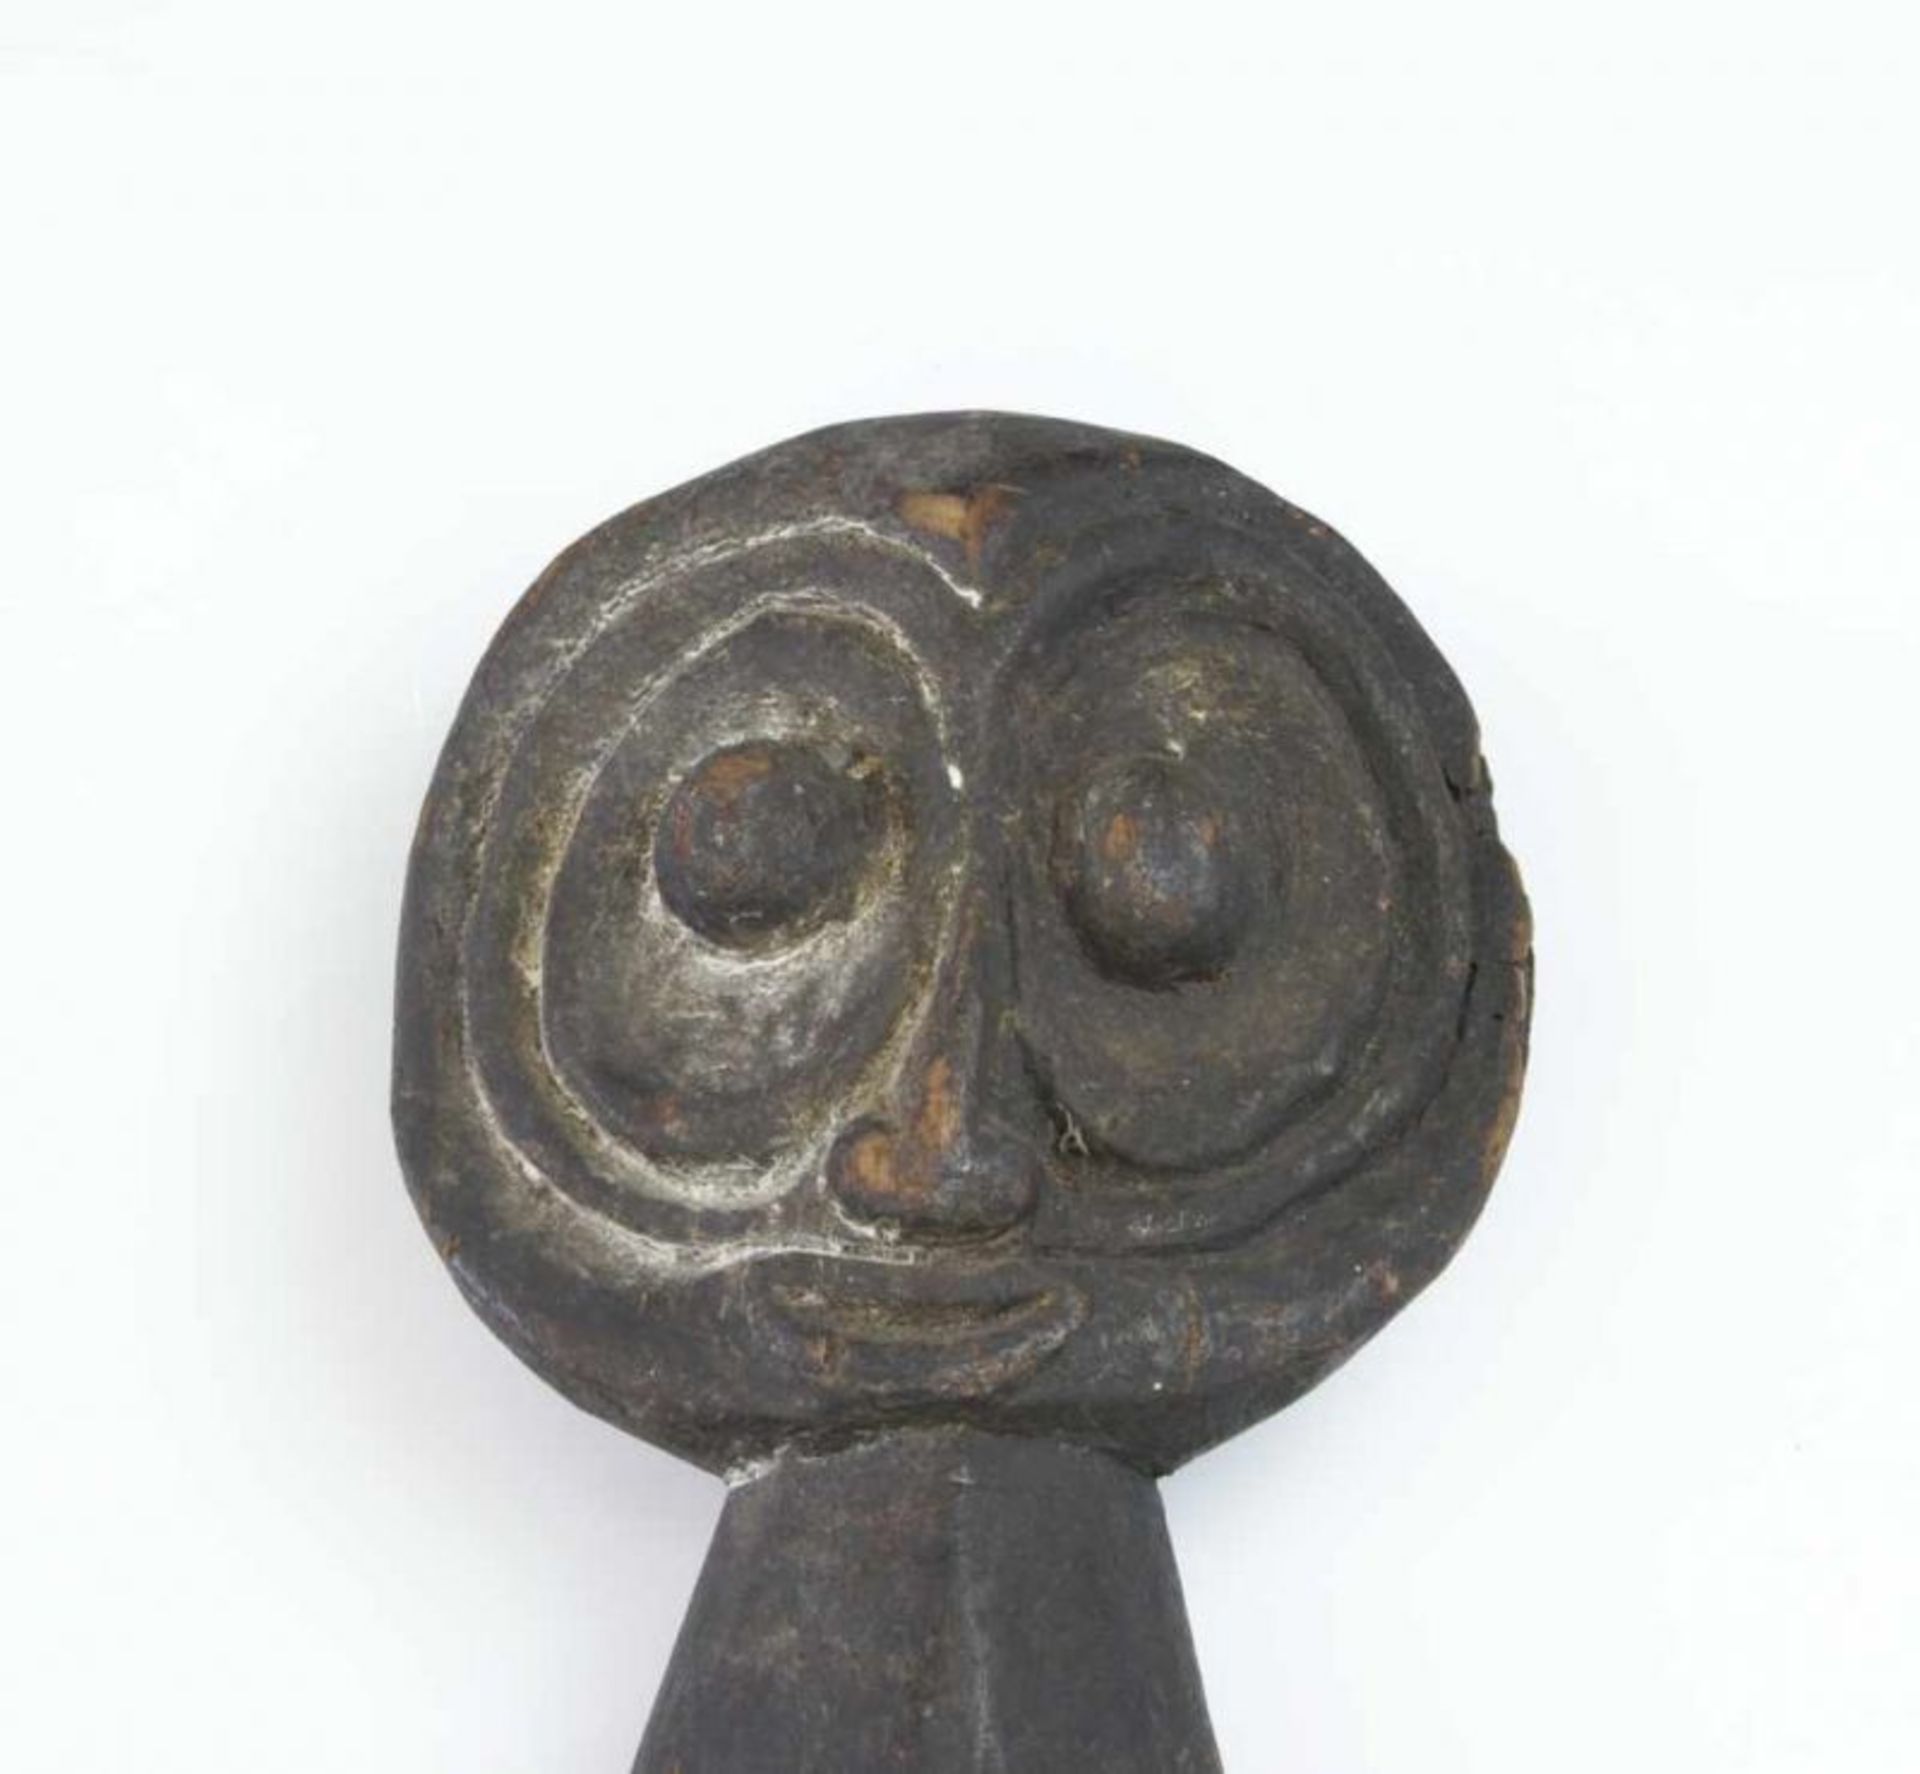 PNG, Sepik, wooden hook figure,with carved concave face, four arrows on rhombic shaped body. With - Bild 3 aus 4